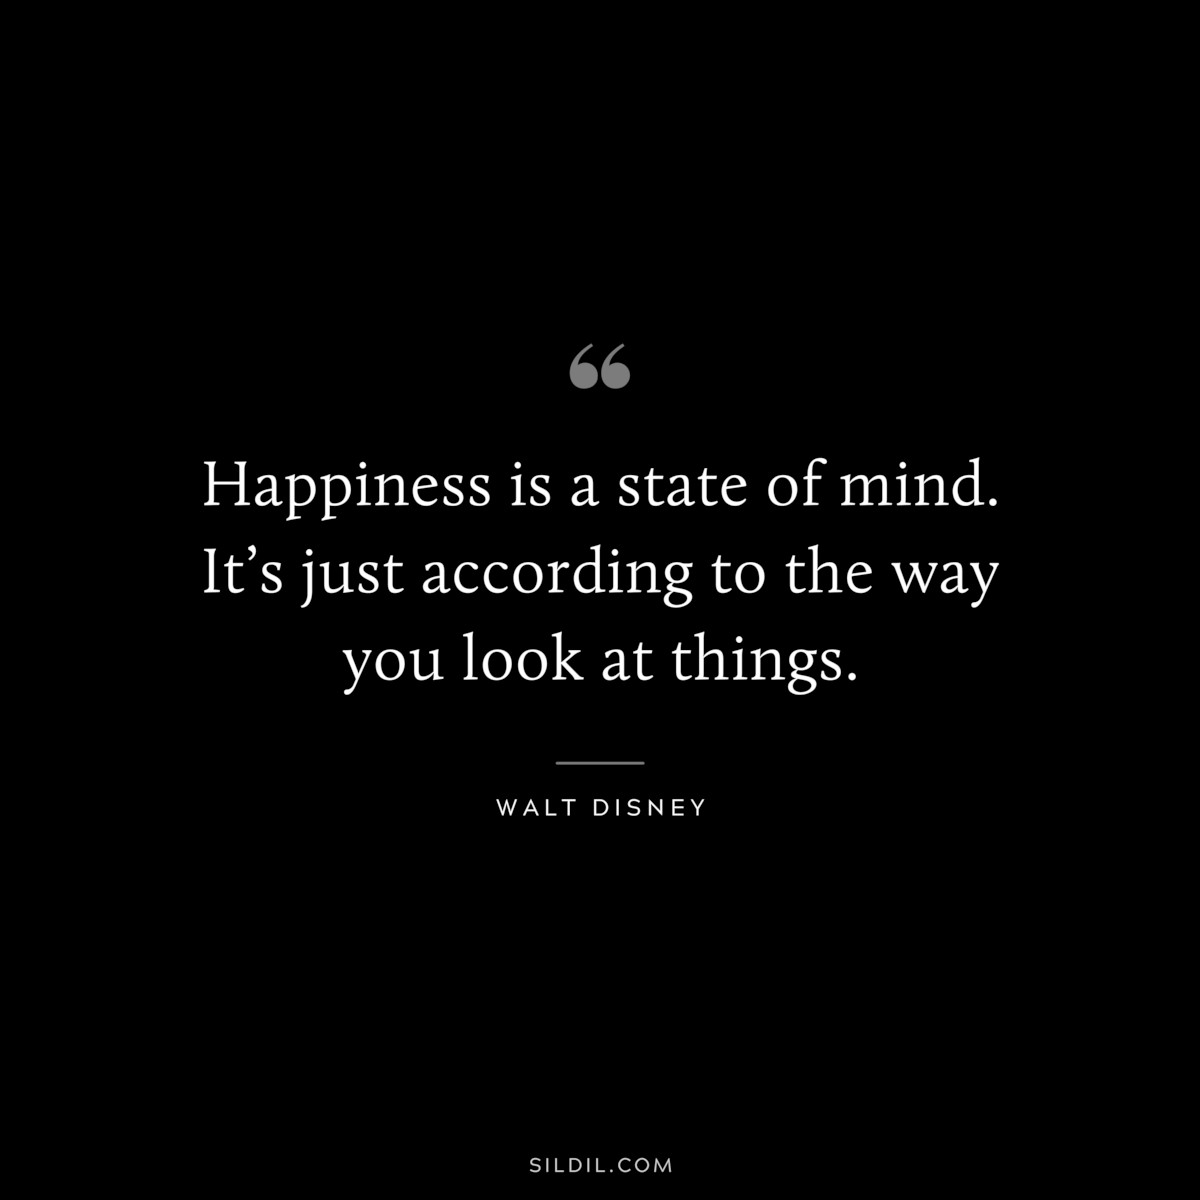 Happiness is a state of mind. It’s just according to the way you look at things. ― Walt Disney